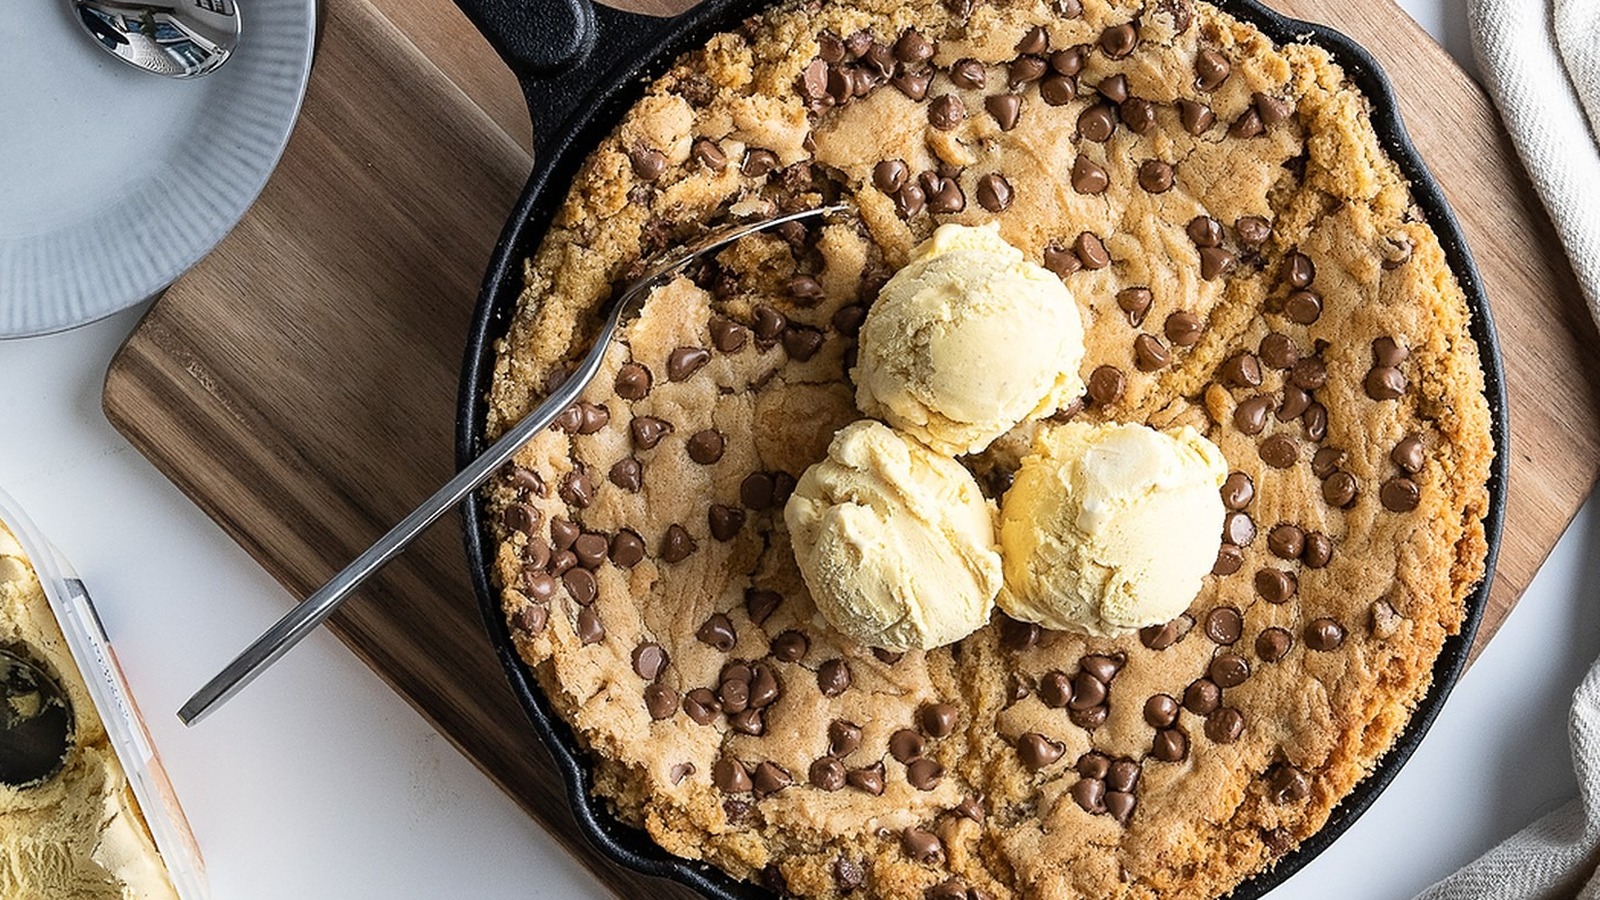 Skillet Chocolate Chip Cookie Recipe - Easy Chocolate Chip Skillet Cookie